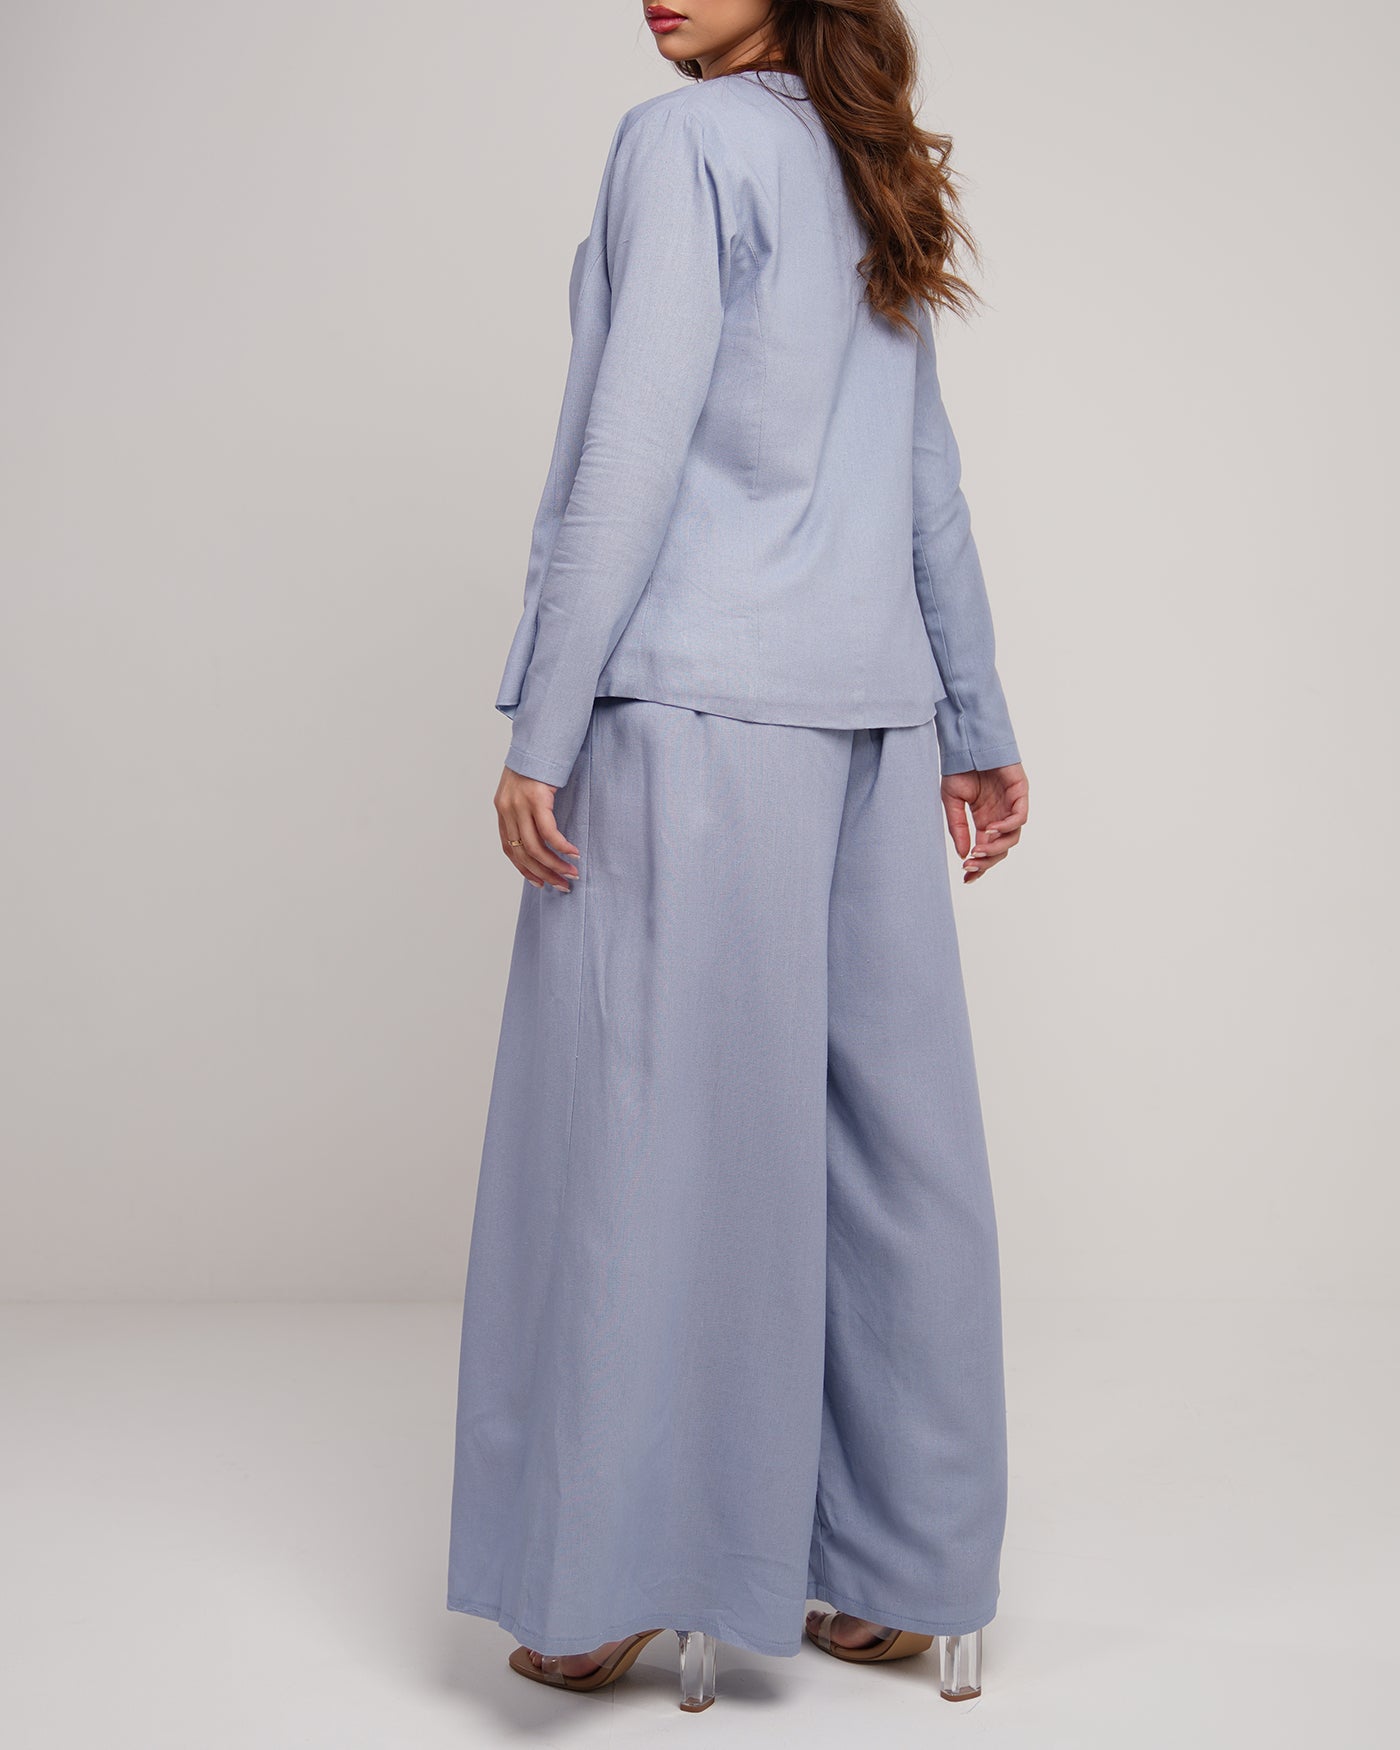 Cloud blue belted wide-legs trousers with long sleeves jacket